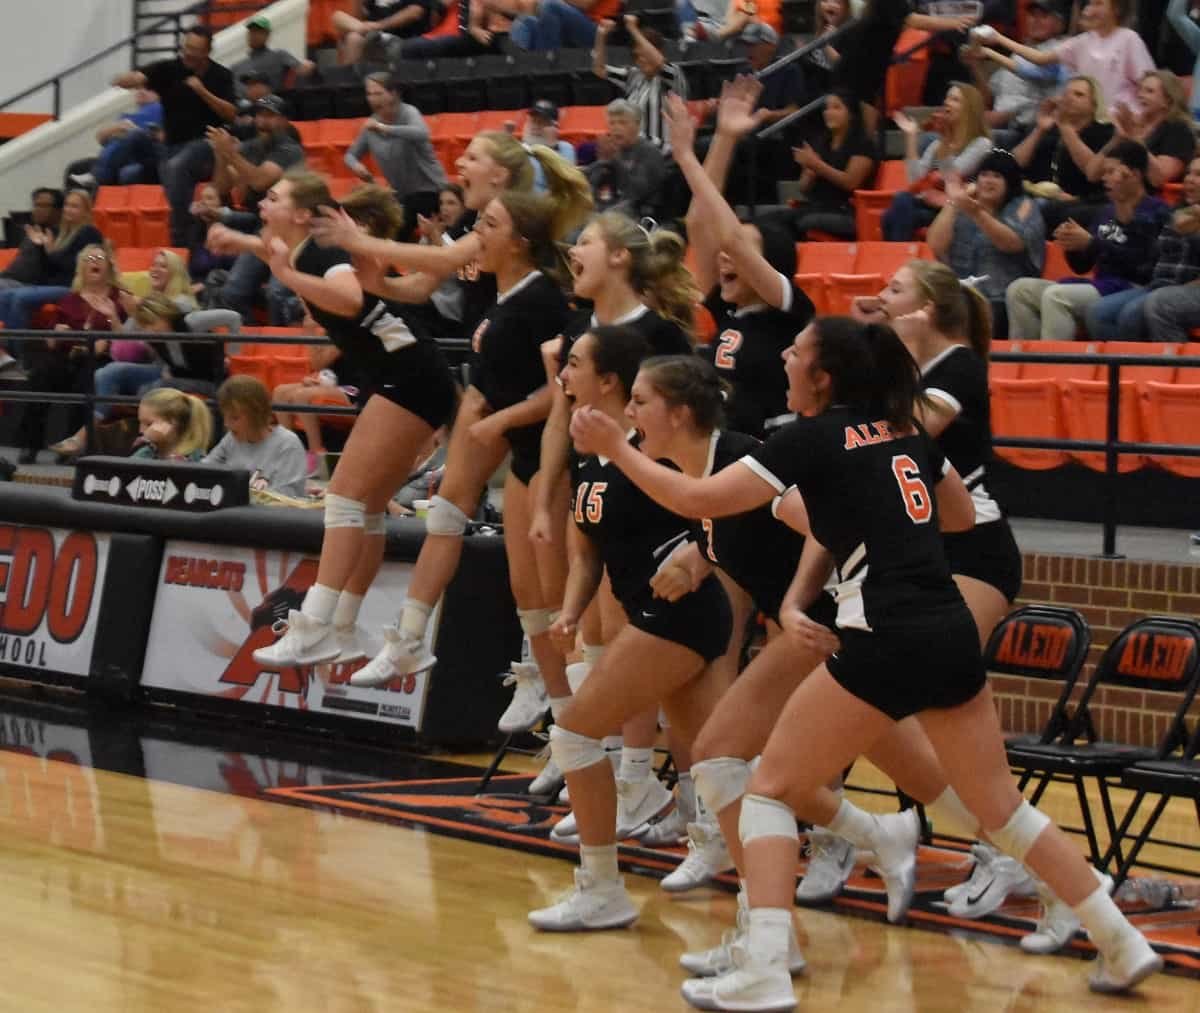 The Ladycats celebrate moments after sweeping Boswell Tuesday night at Aledo. The Ladycats' win ties Aledo and Boswell for first place in District 6-5A. Photos by Tony Eierdam